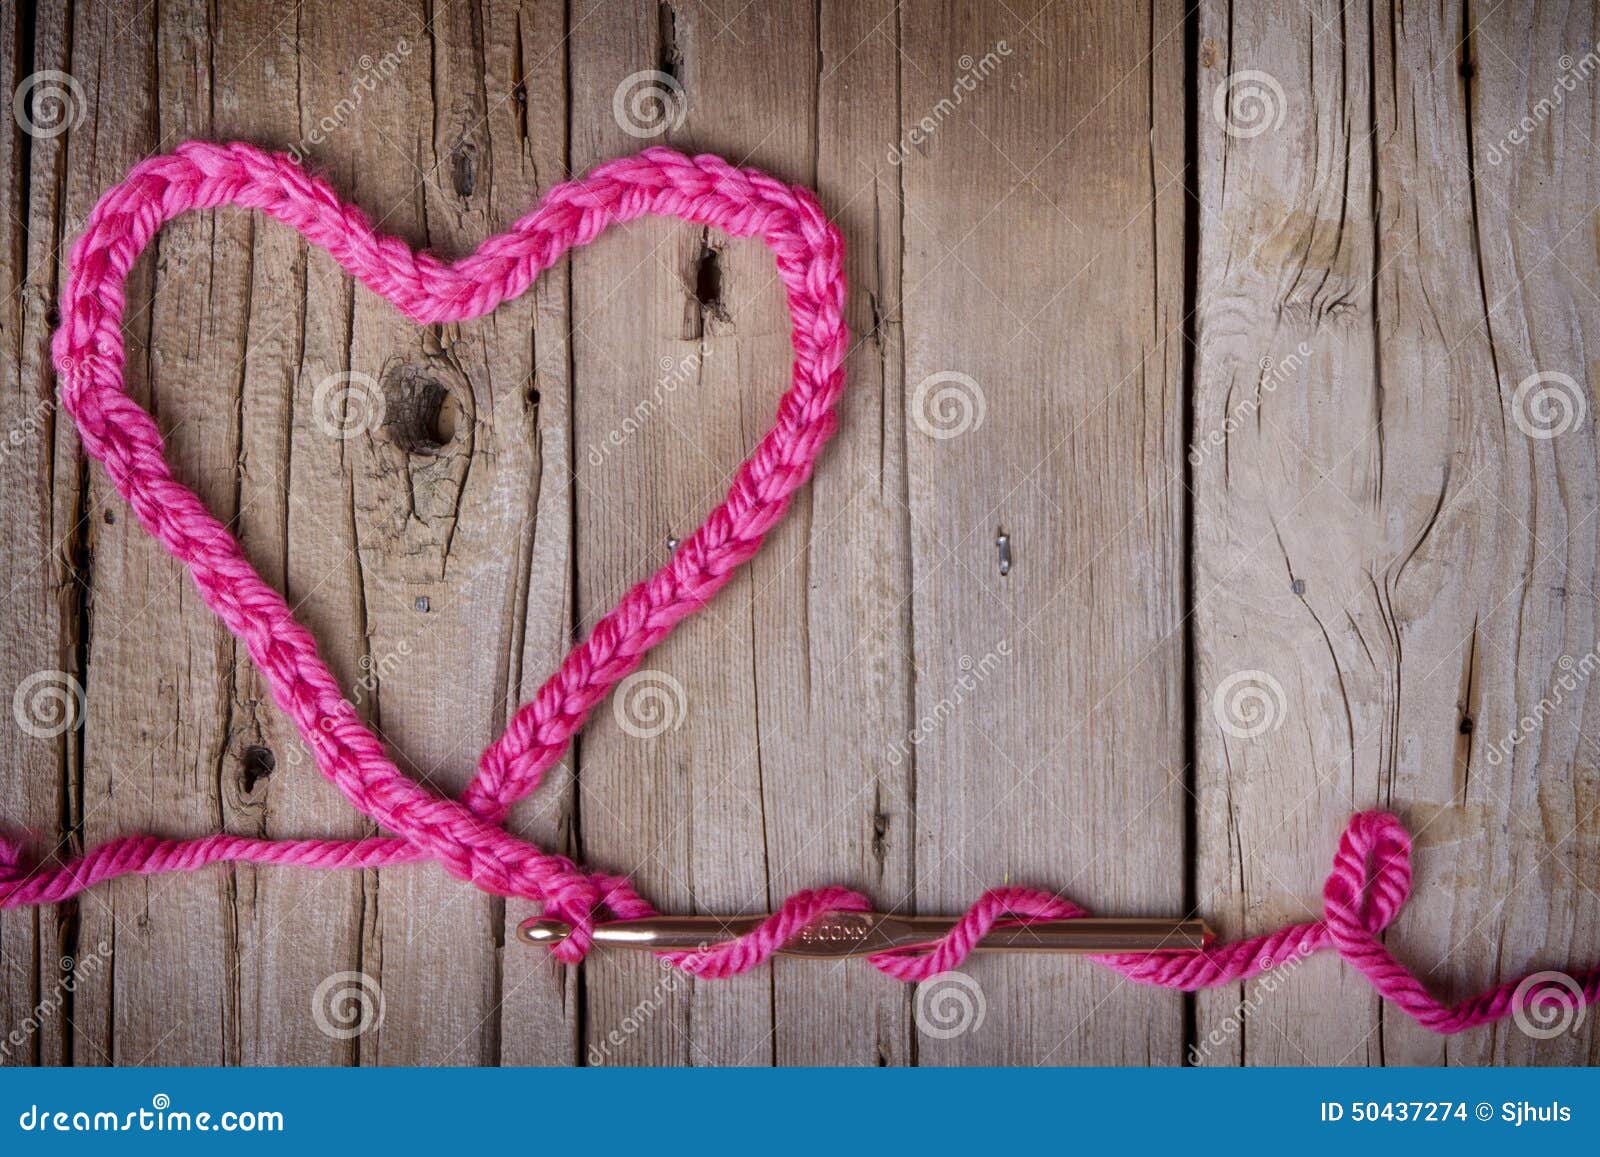 a crochet chain in the  of a heart